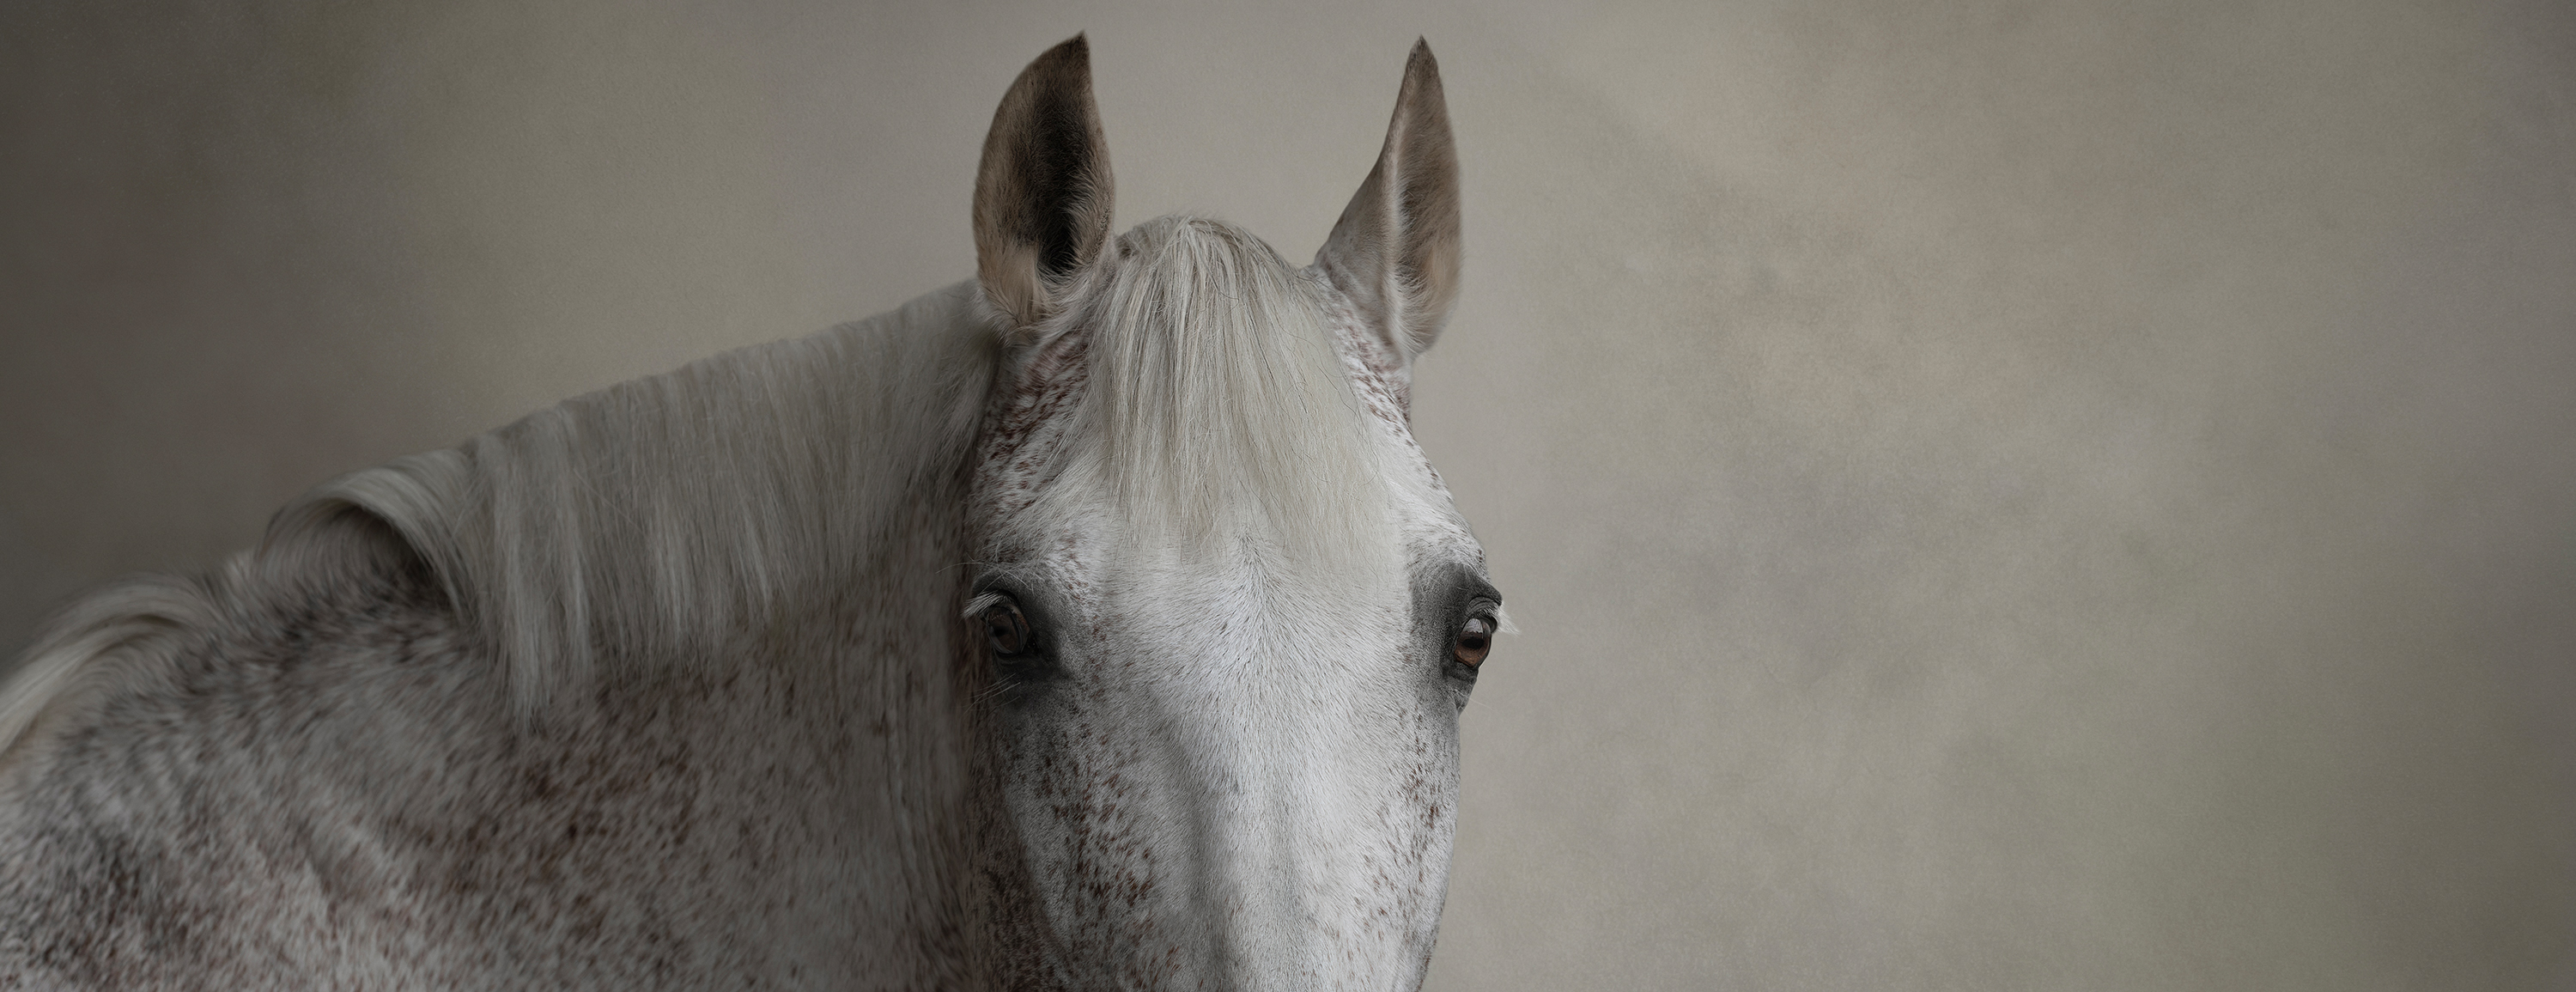 image of a beautiful horse in fine art detail